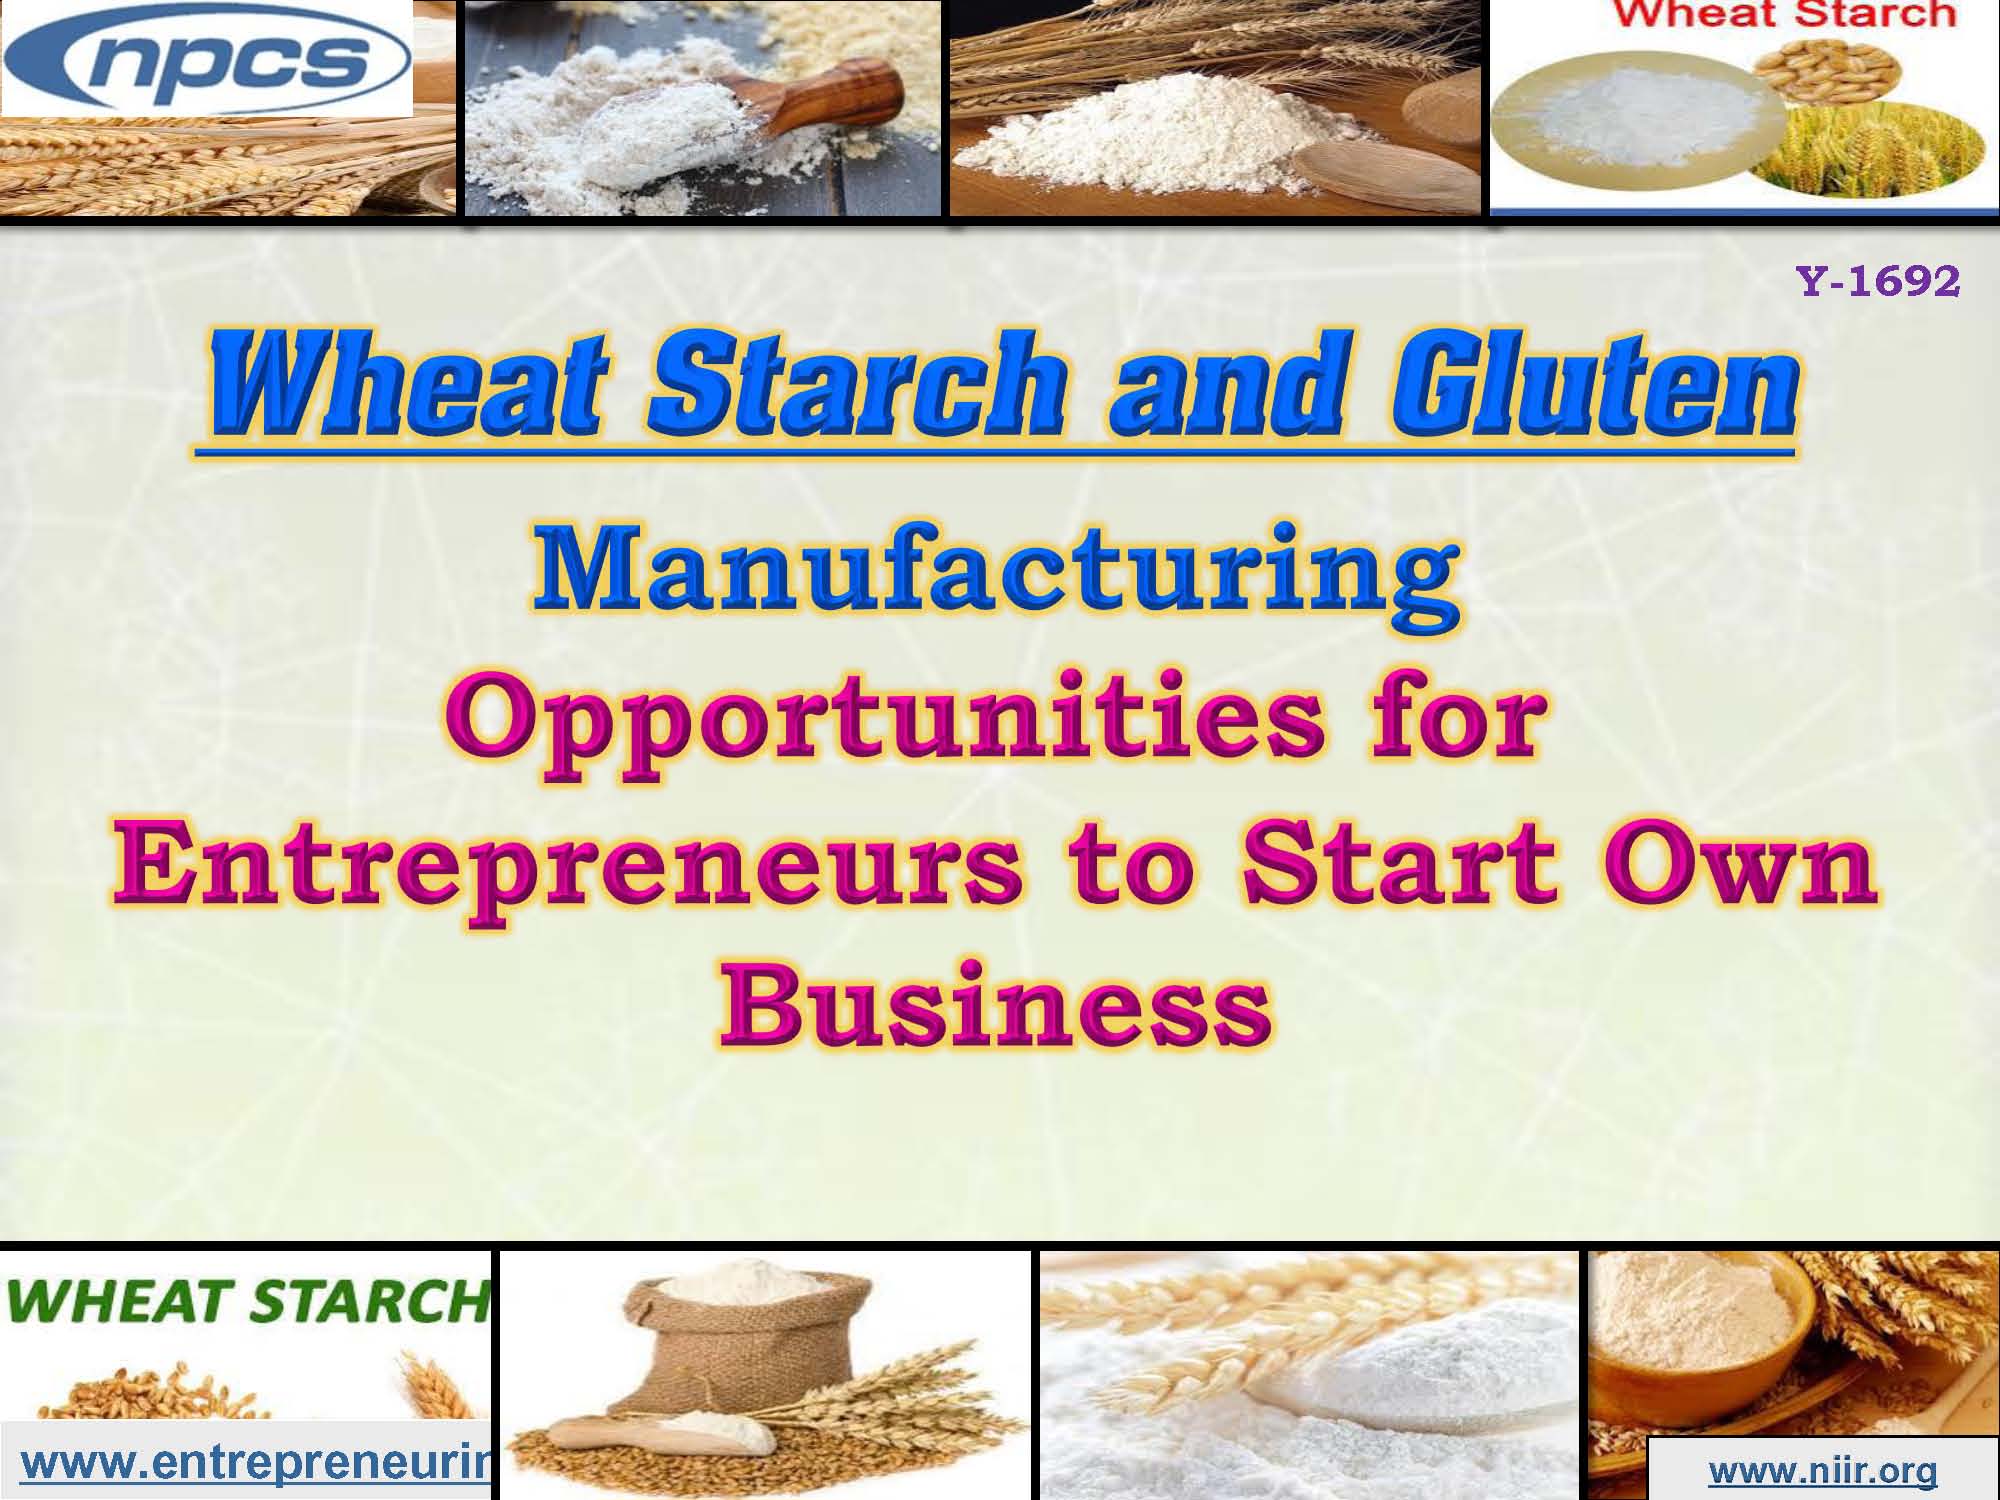 Wheat Starch and Gluten Manufacturing